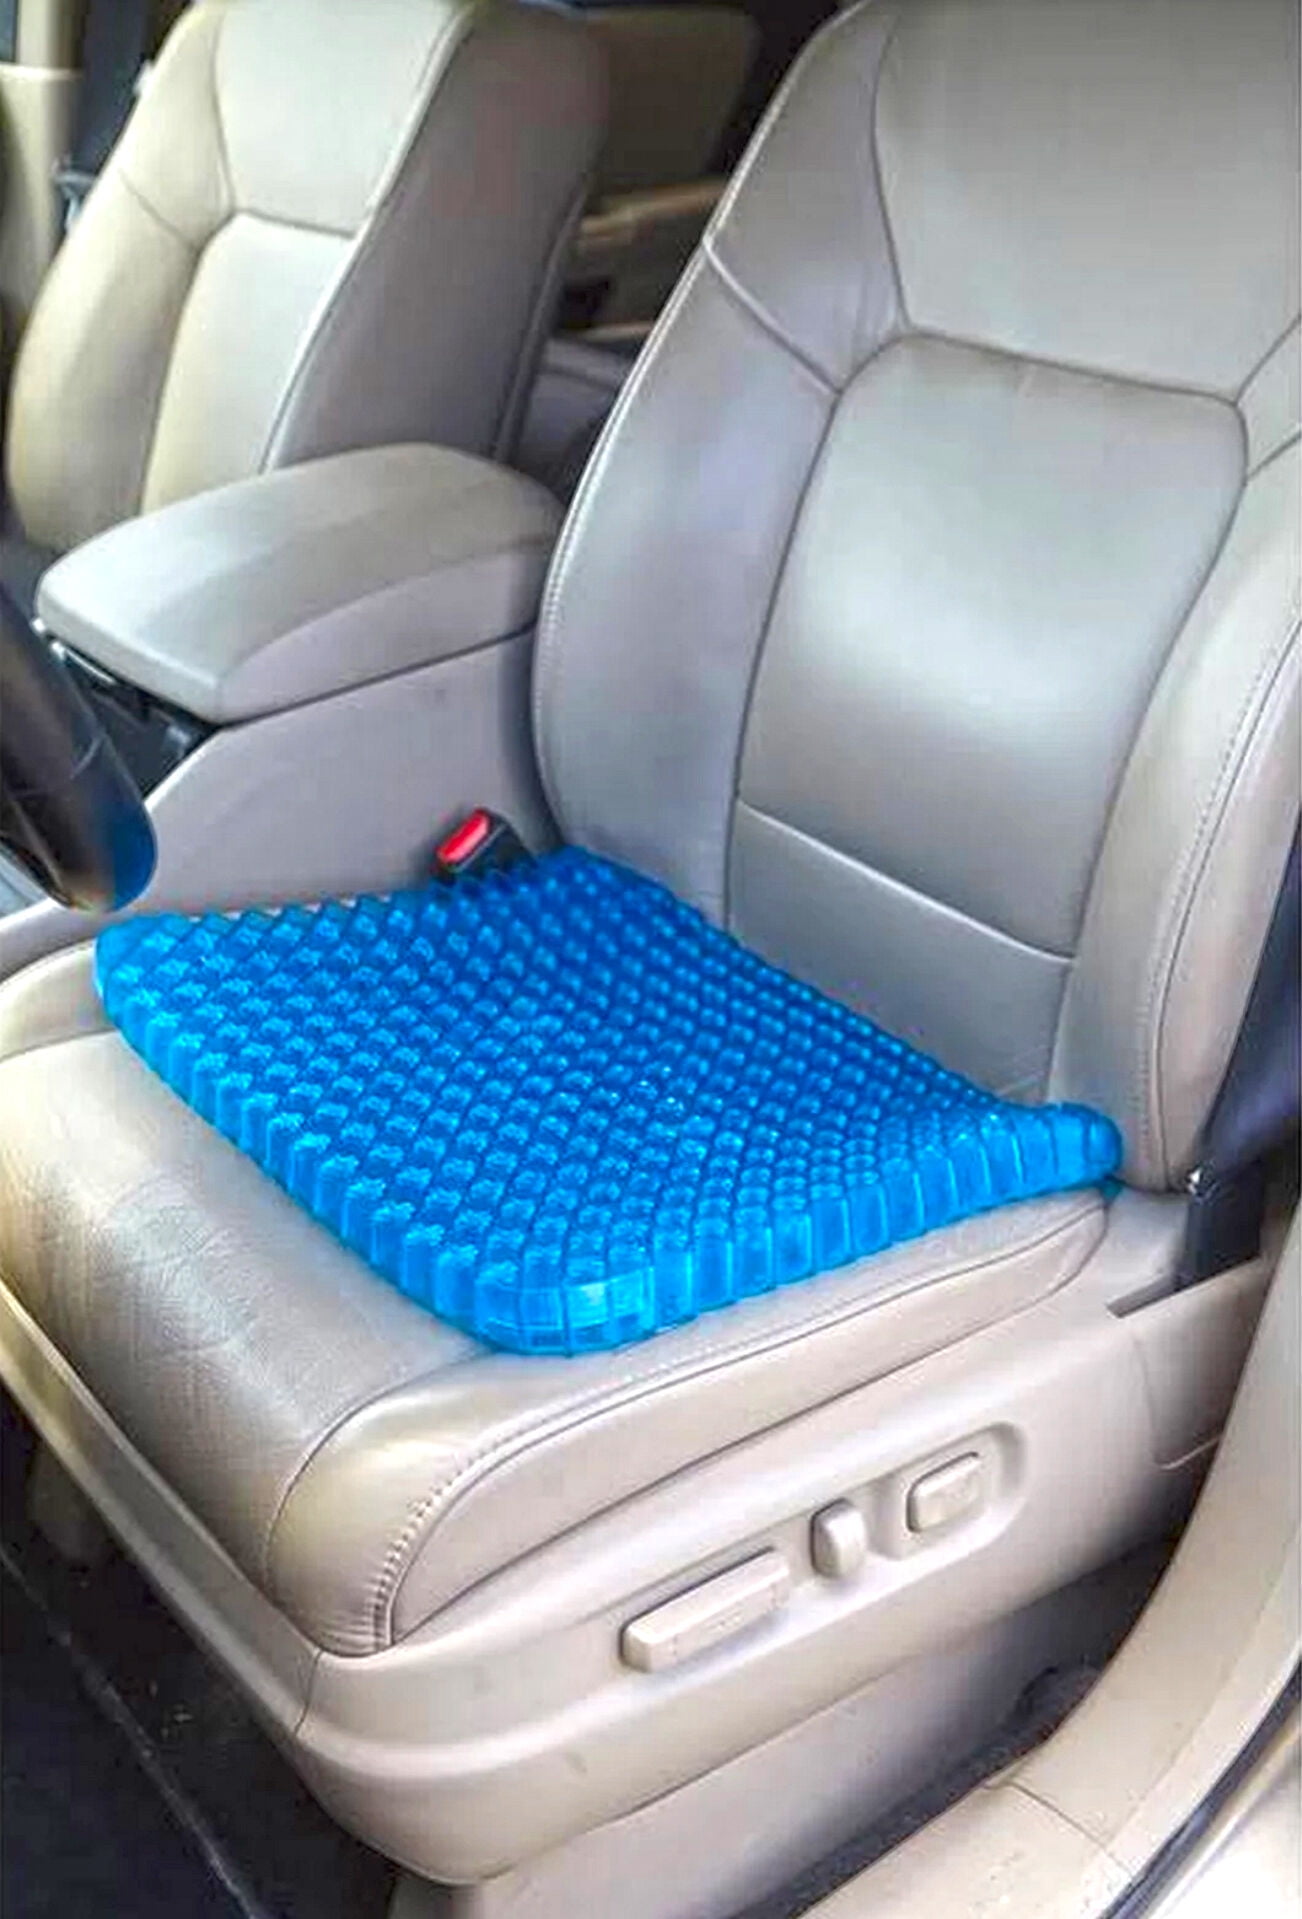 Gel Honeycomb Cooling Seat Cushion with 2.4 inch Thick Breathable Ergonomic & Orthopedic Design, Non-Slip Bottom, Absorbs Pressure Point for Ultimate